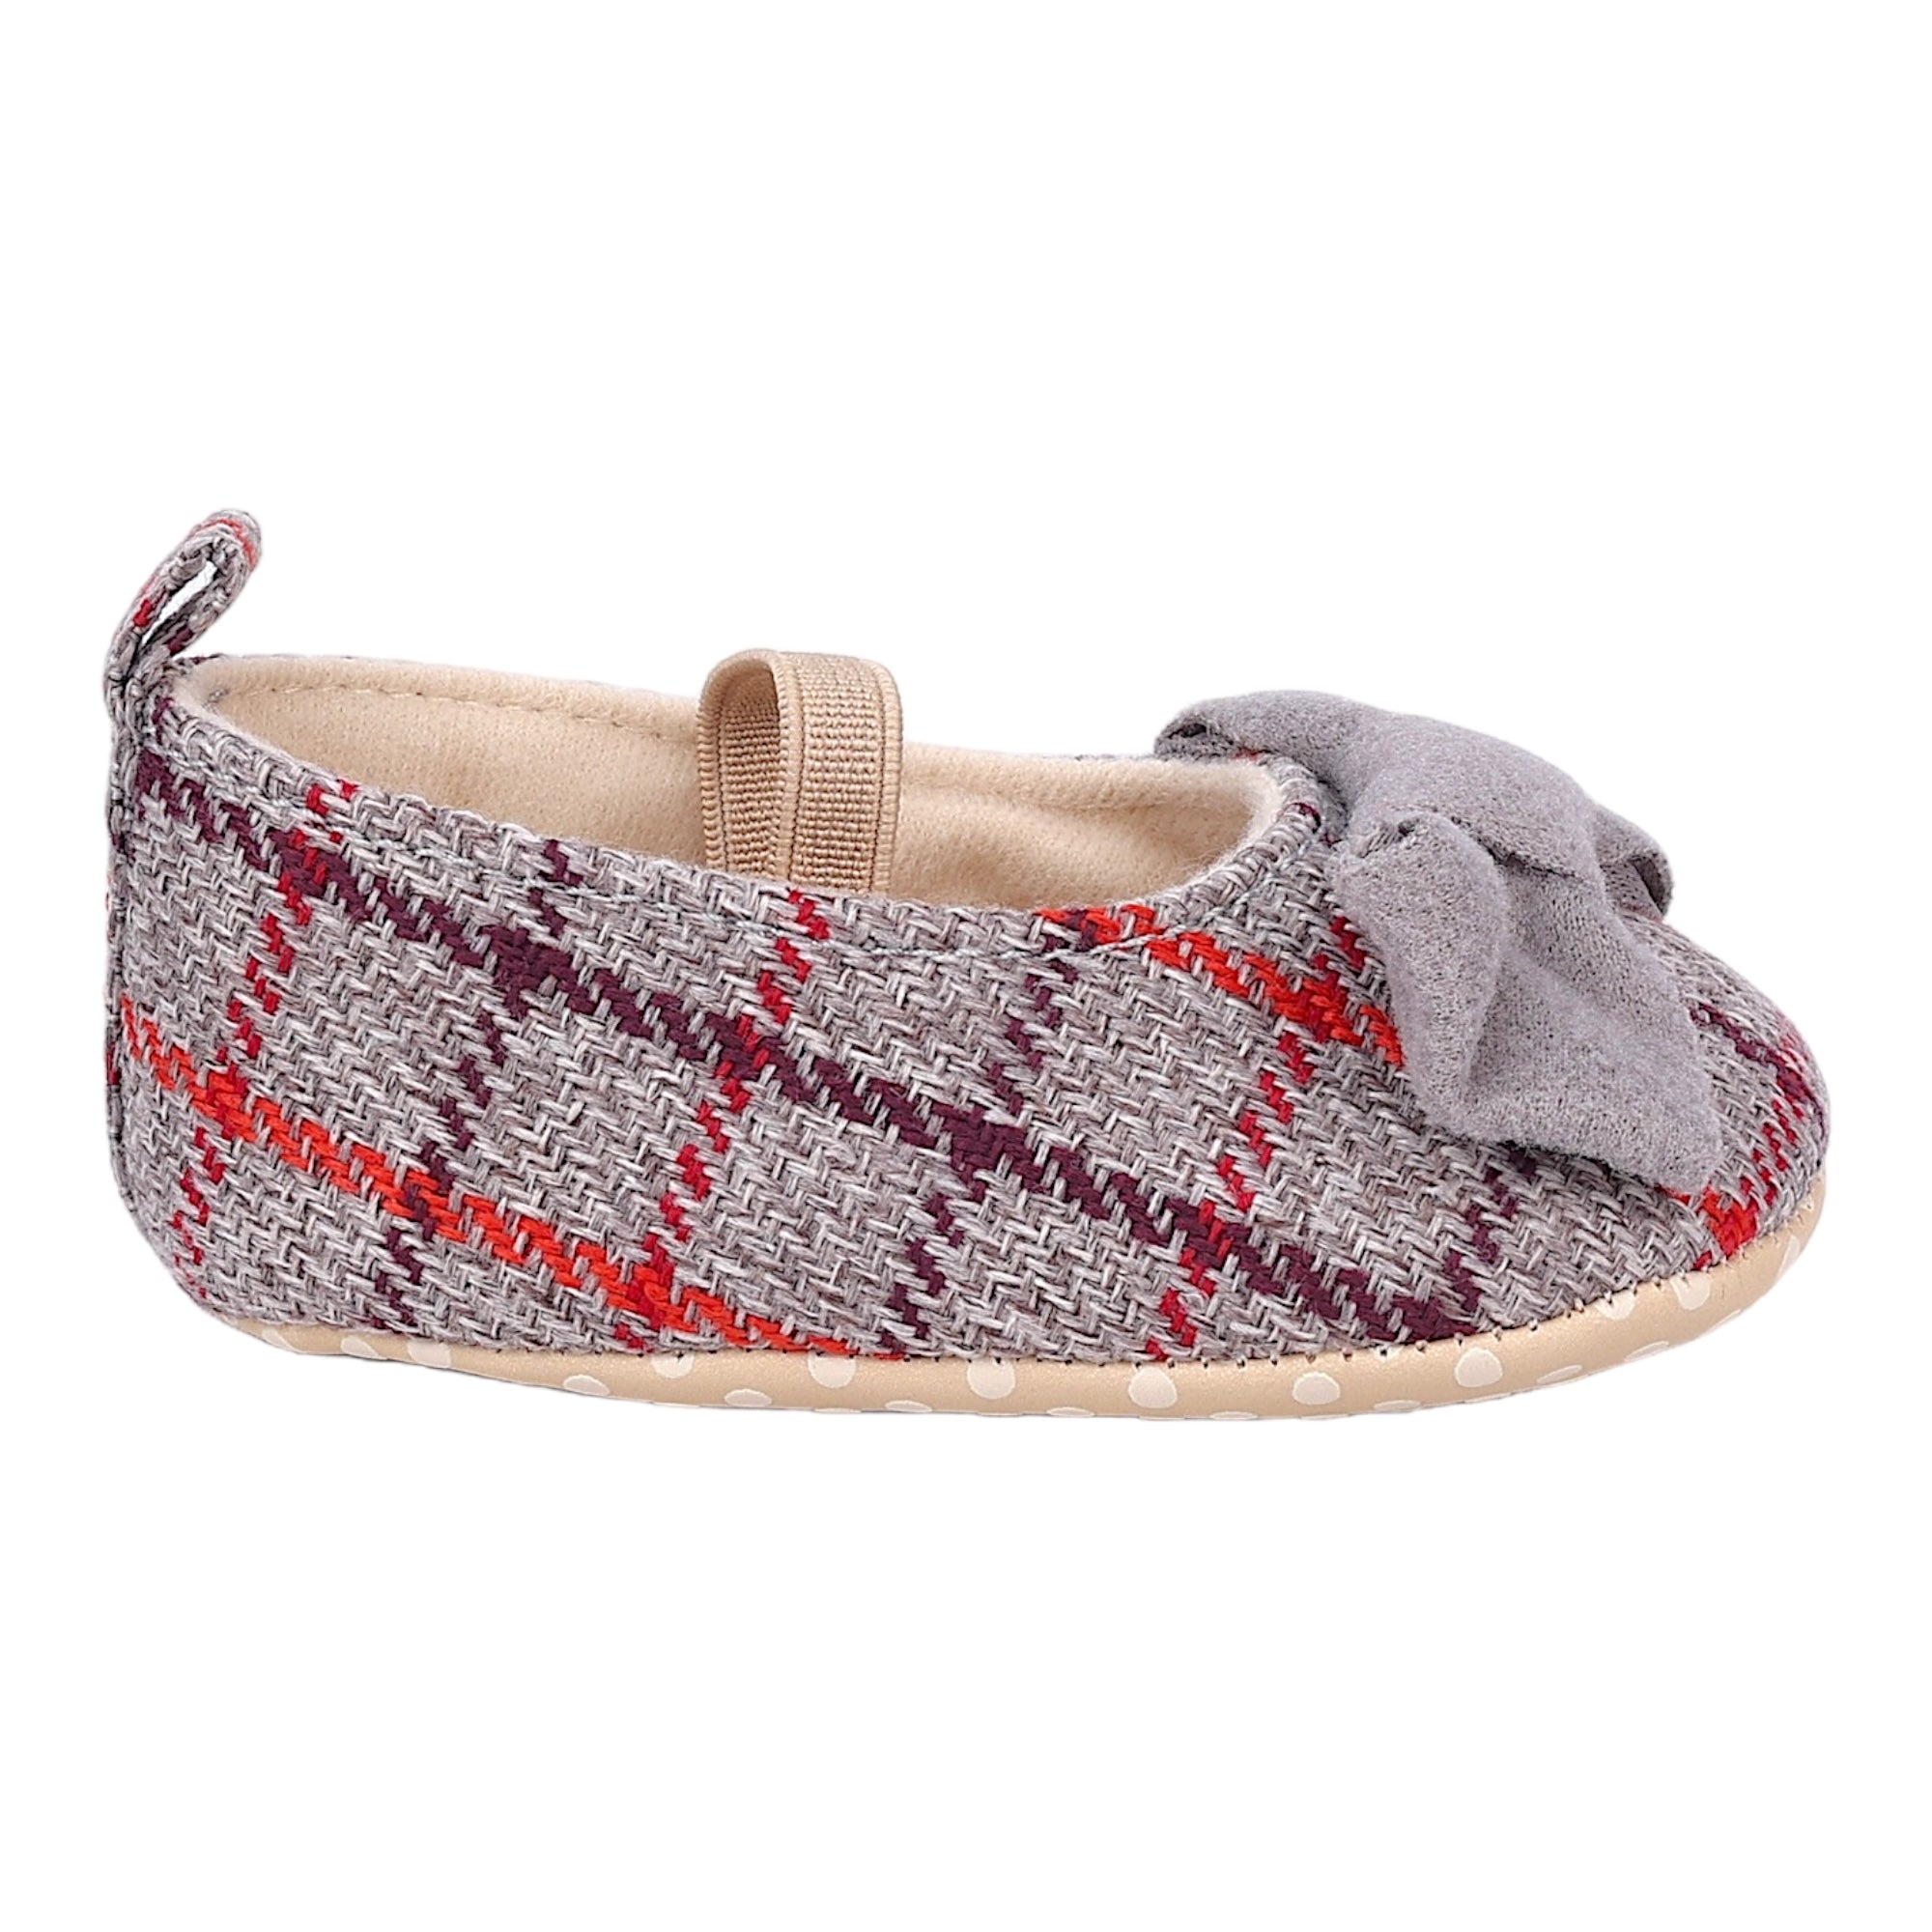 Baby Moo Bow With Elastic Strap Plaid Ballerina Booties - Grey